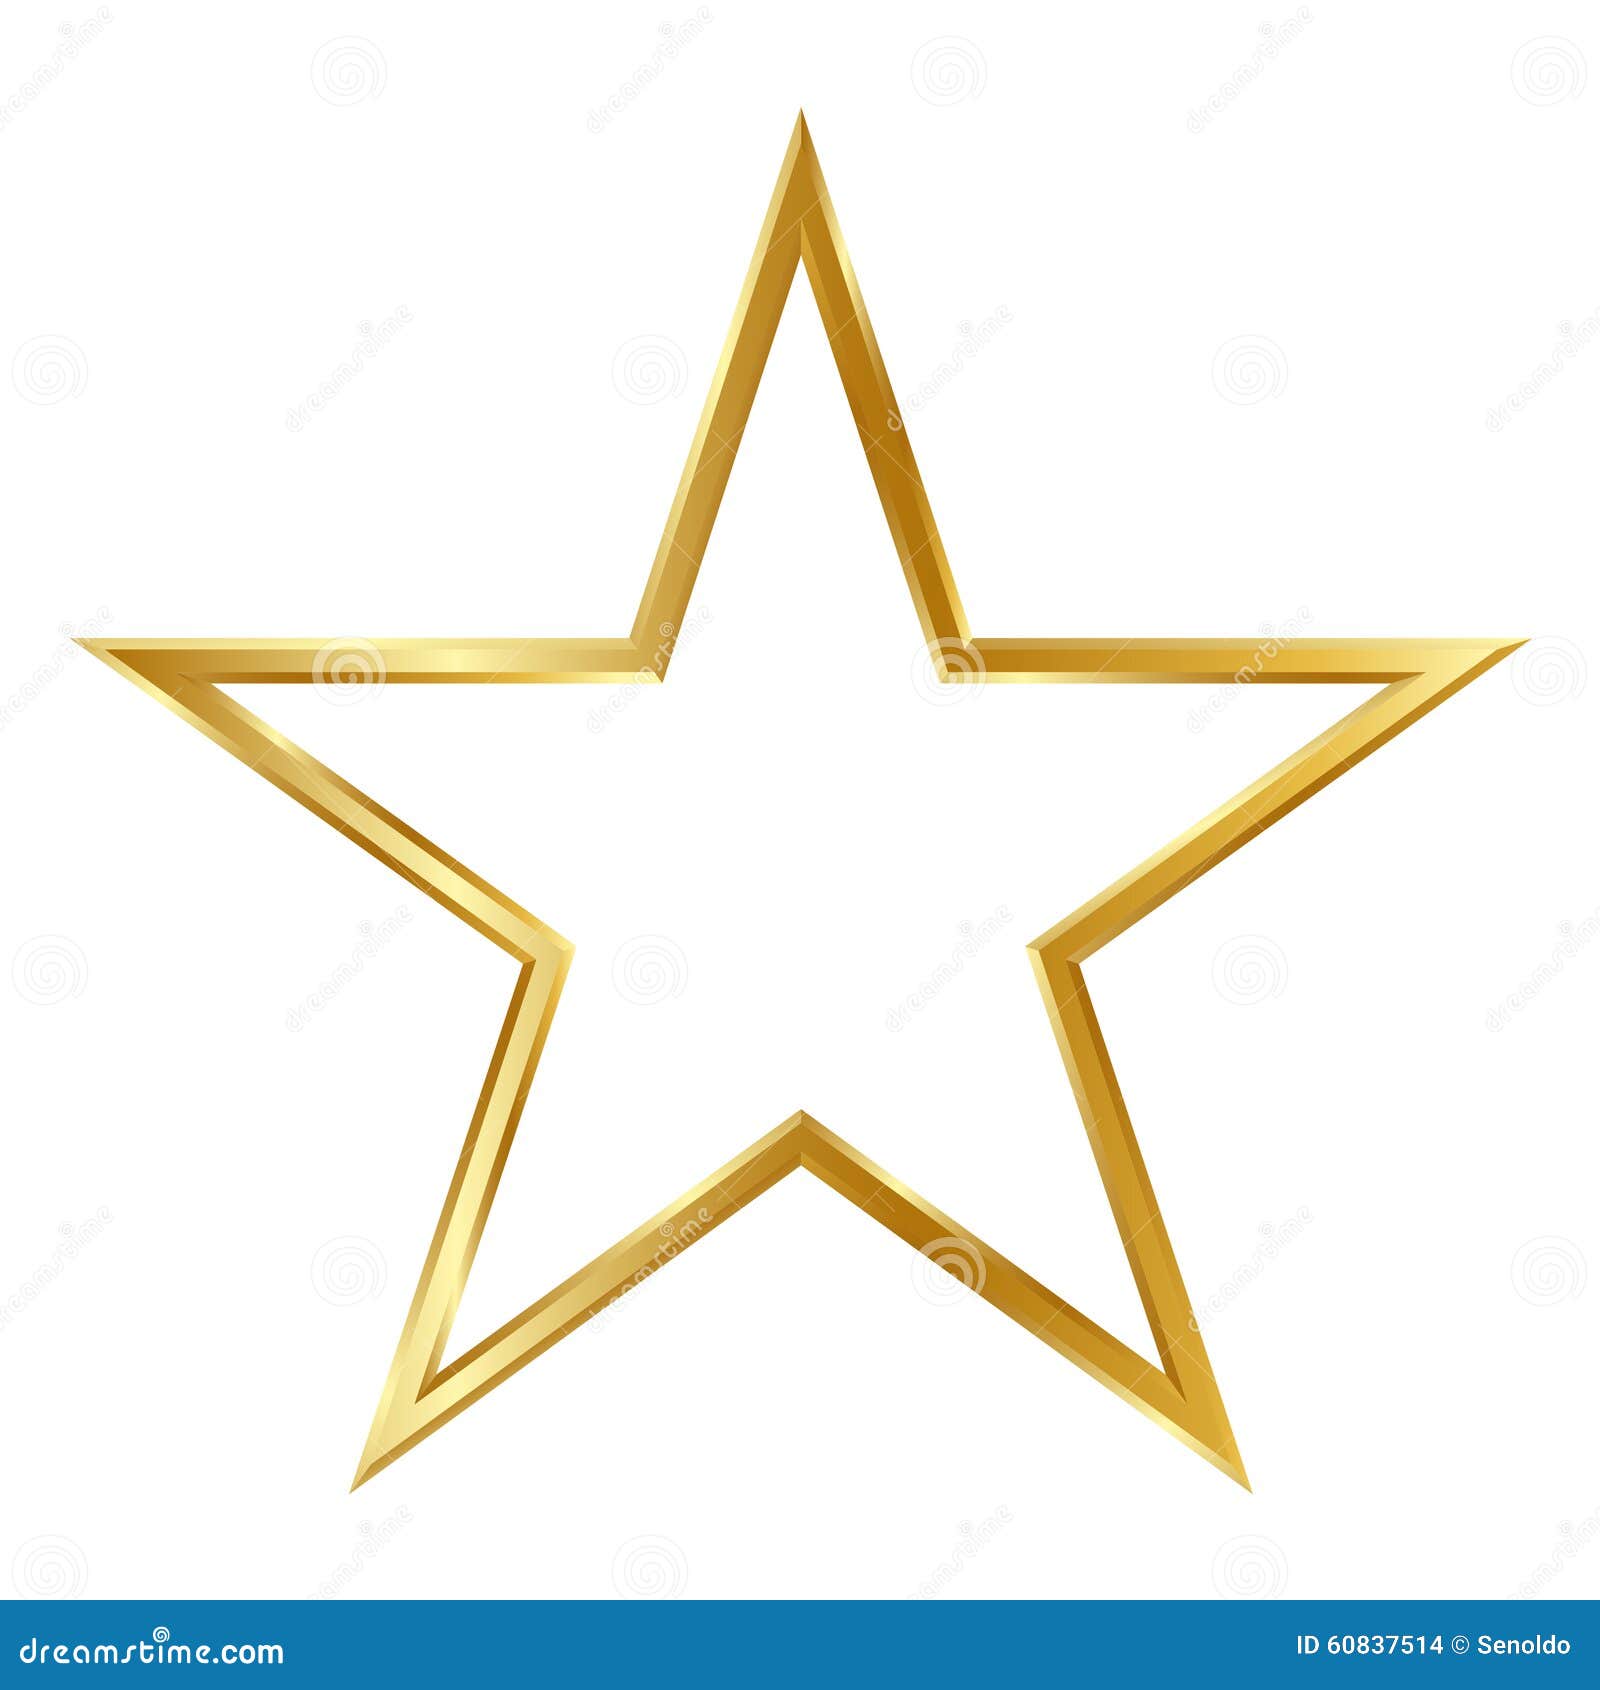 Gold Star - Openclipart